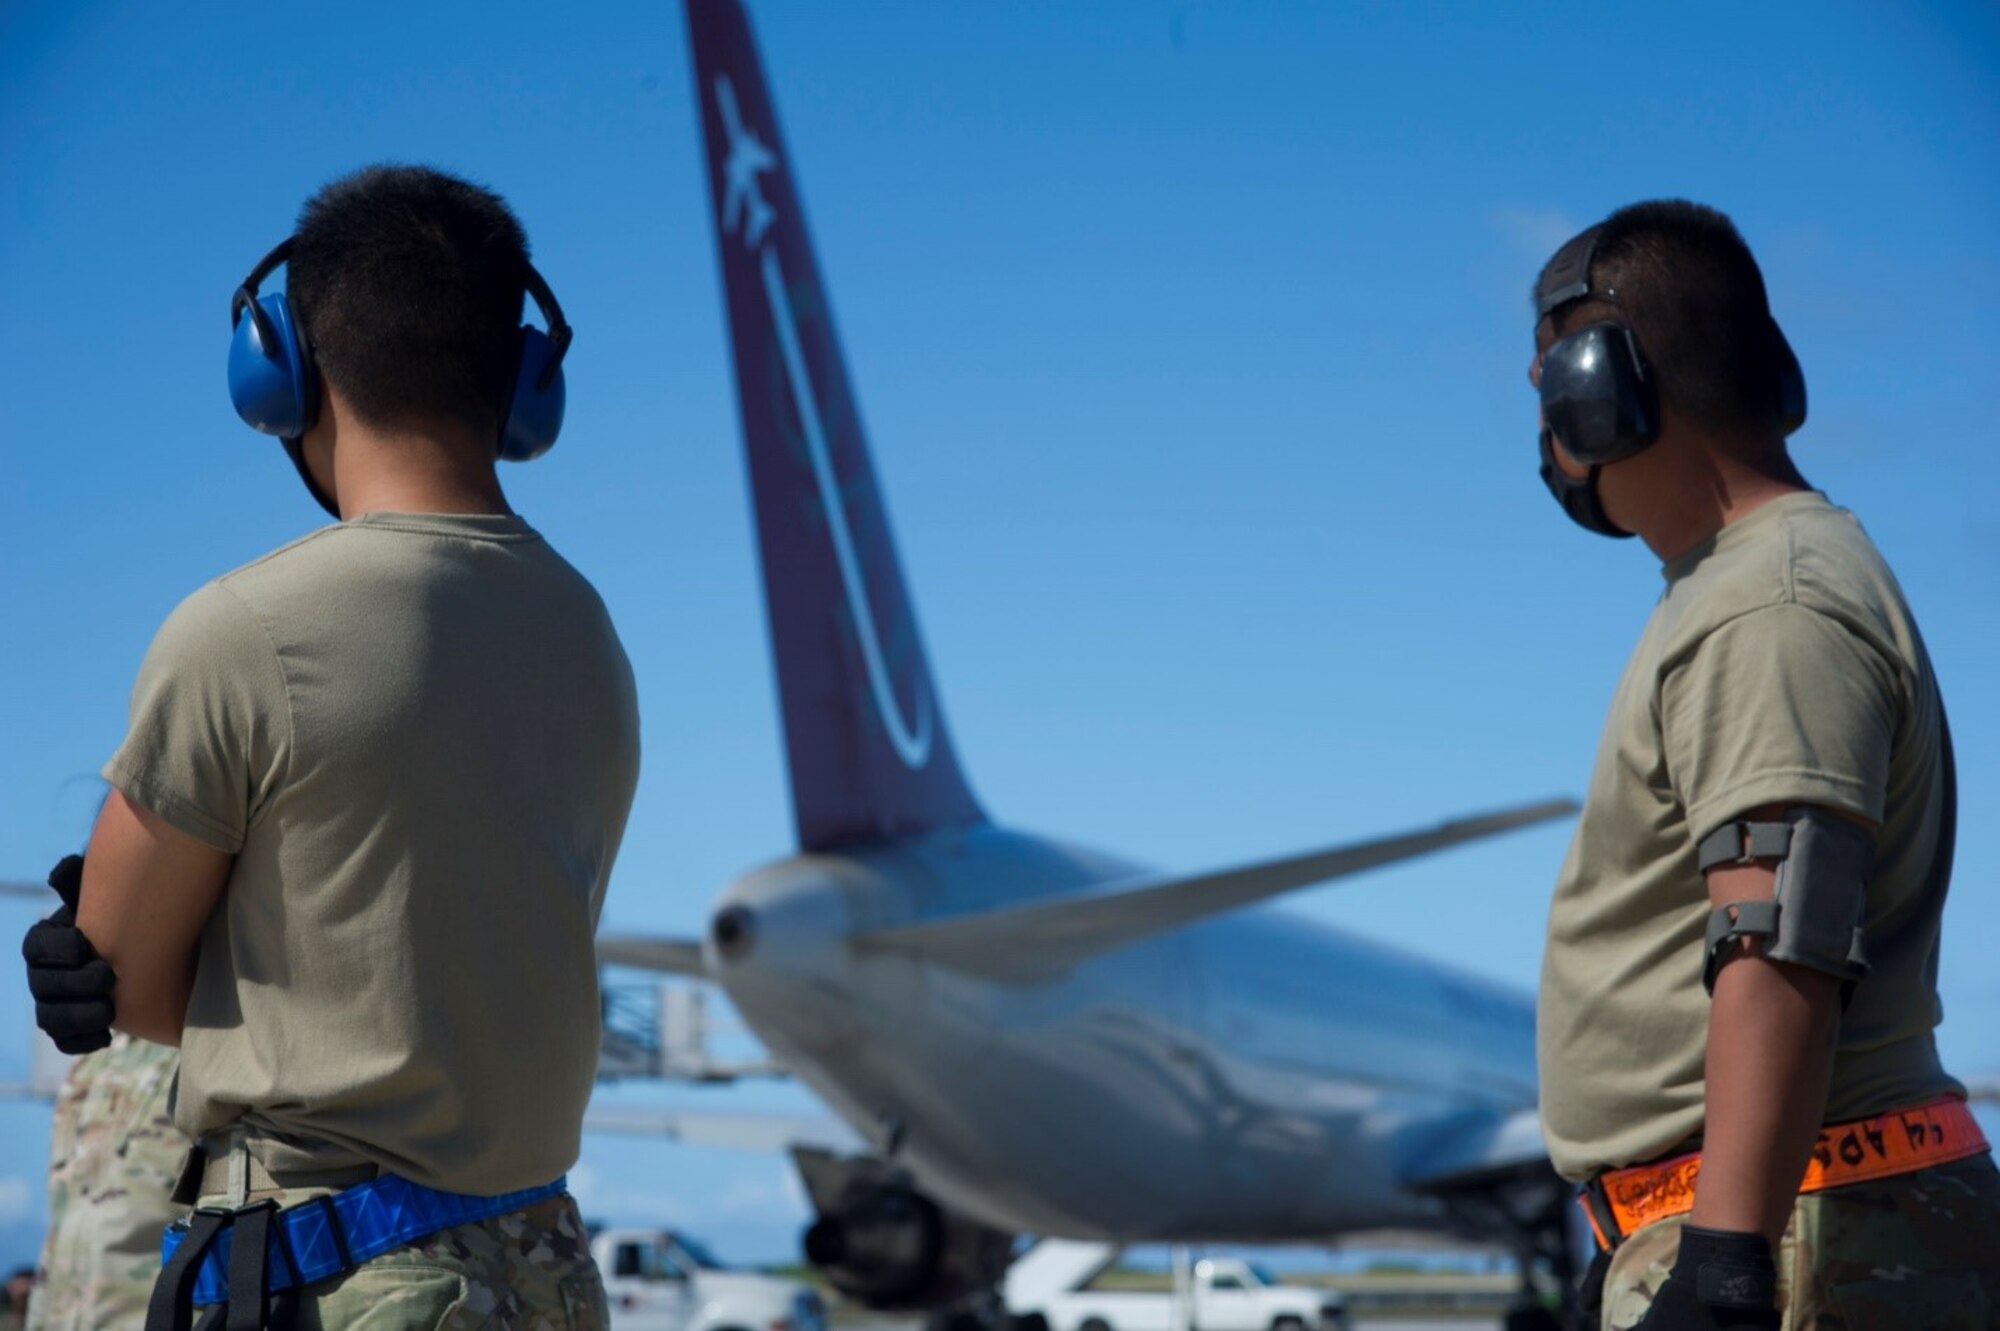 U.S. Air Force Airman Lynch Santos, left, and Tech. Sgt. Bedrick Briones, both 44th Aerial Port Squadron air transportation specialists, wait on the flight line for the final blocking of the Omni Air International aircraft carrying the COVID-19 refrigerators bound for Andersen Air Force Base, Guam, Feb. 23, 2021.